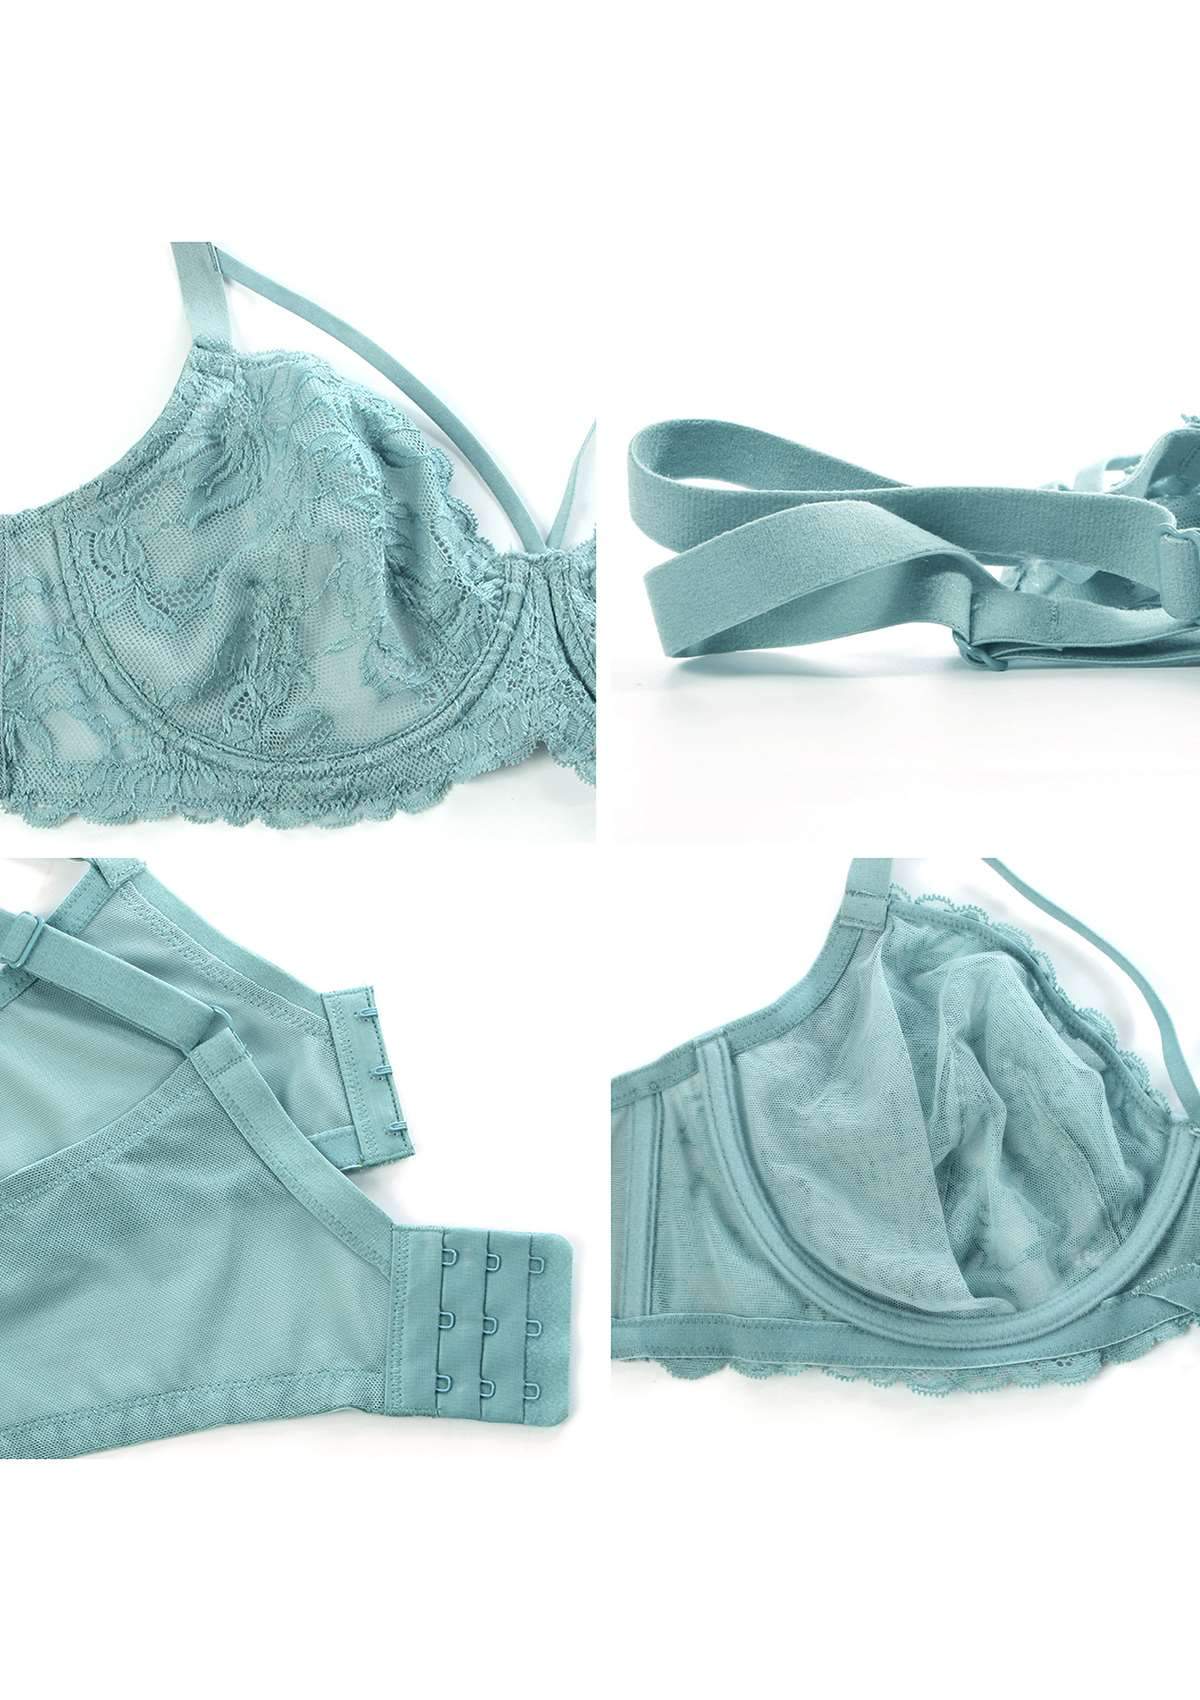 HSIA Pretty In Petals Unlined Lace Bra: Comfortable And Supportive Bra - Pewter Blue / 40 / DDD/F